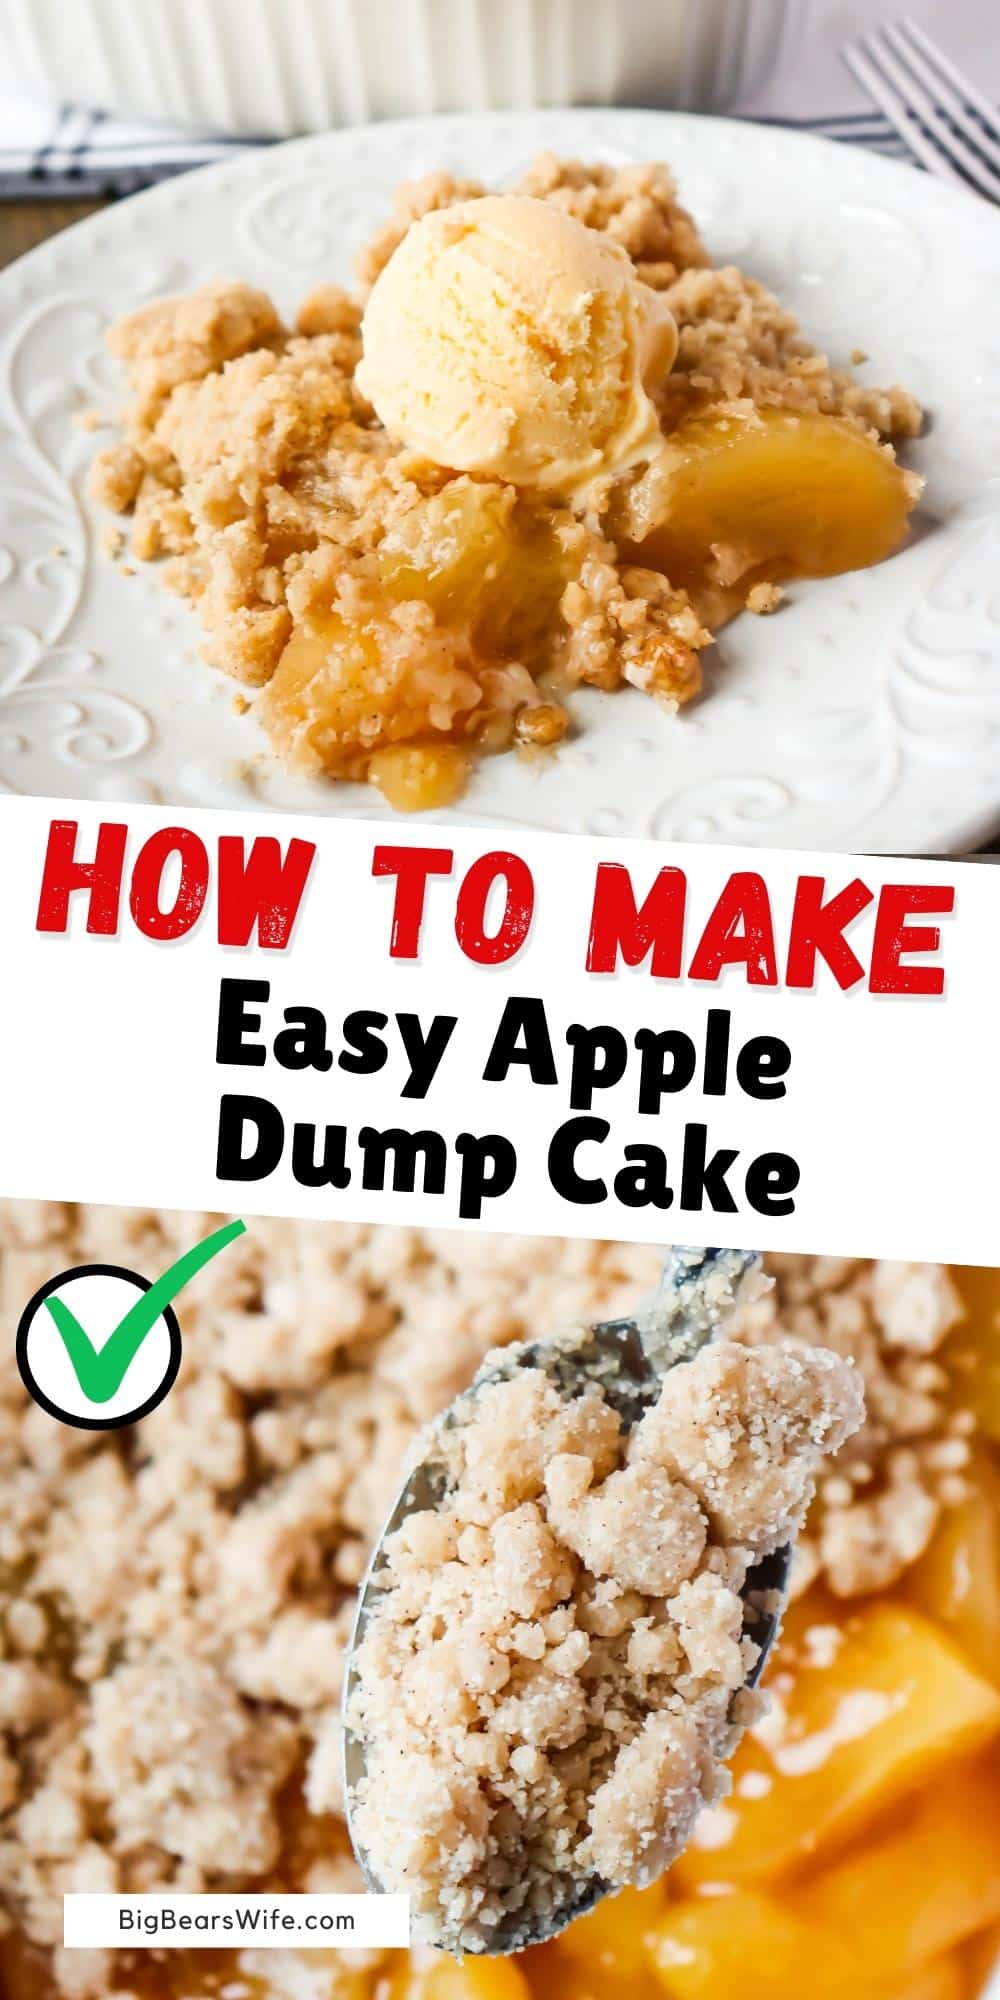 This easy Apple Dump Cake is fall in a cake! Just mix, dump and bake to create the best apple cake that's perfect for Fall!  via @bigbearswife